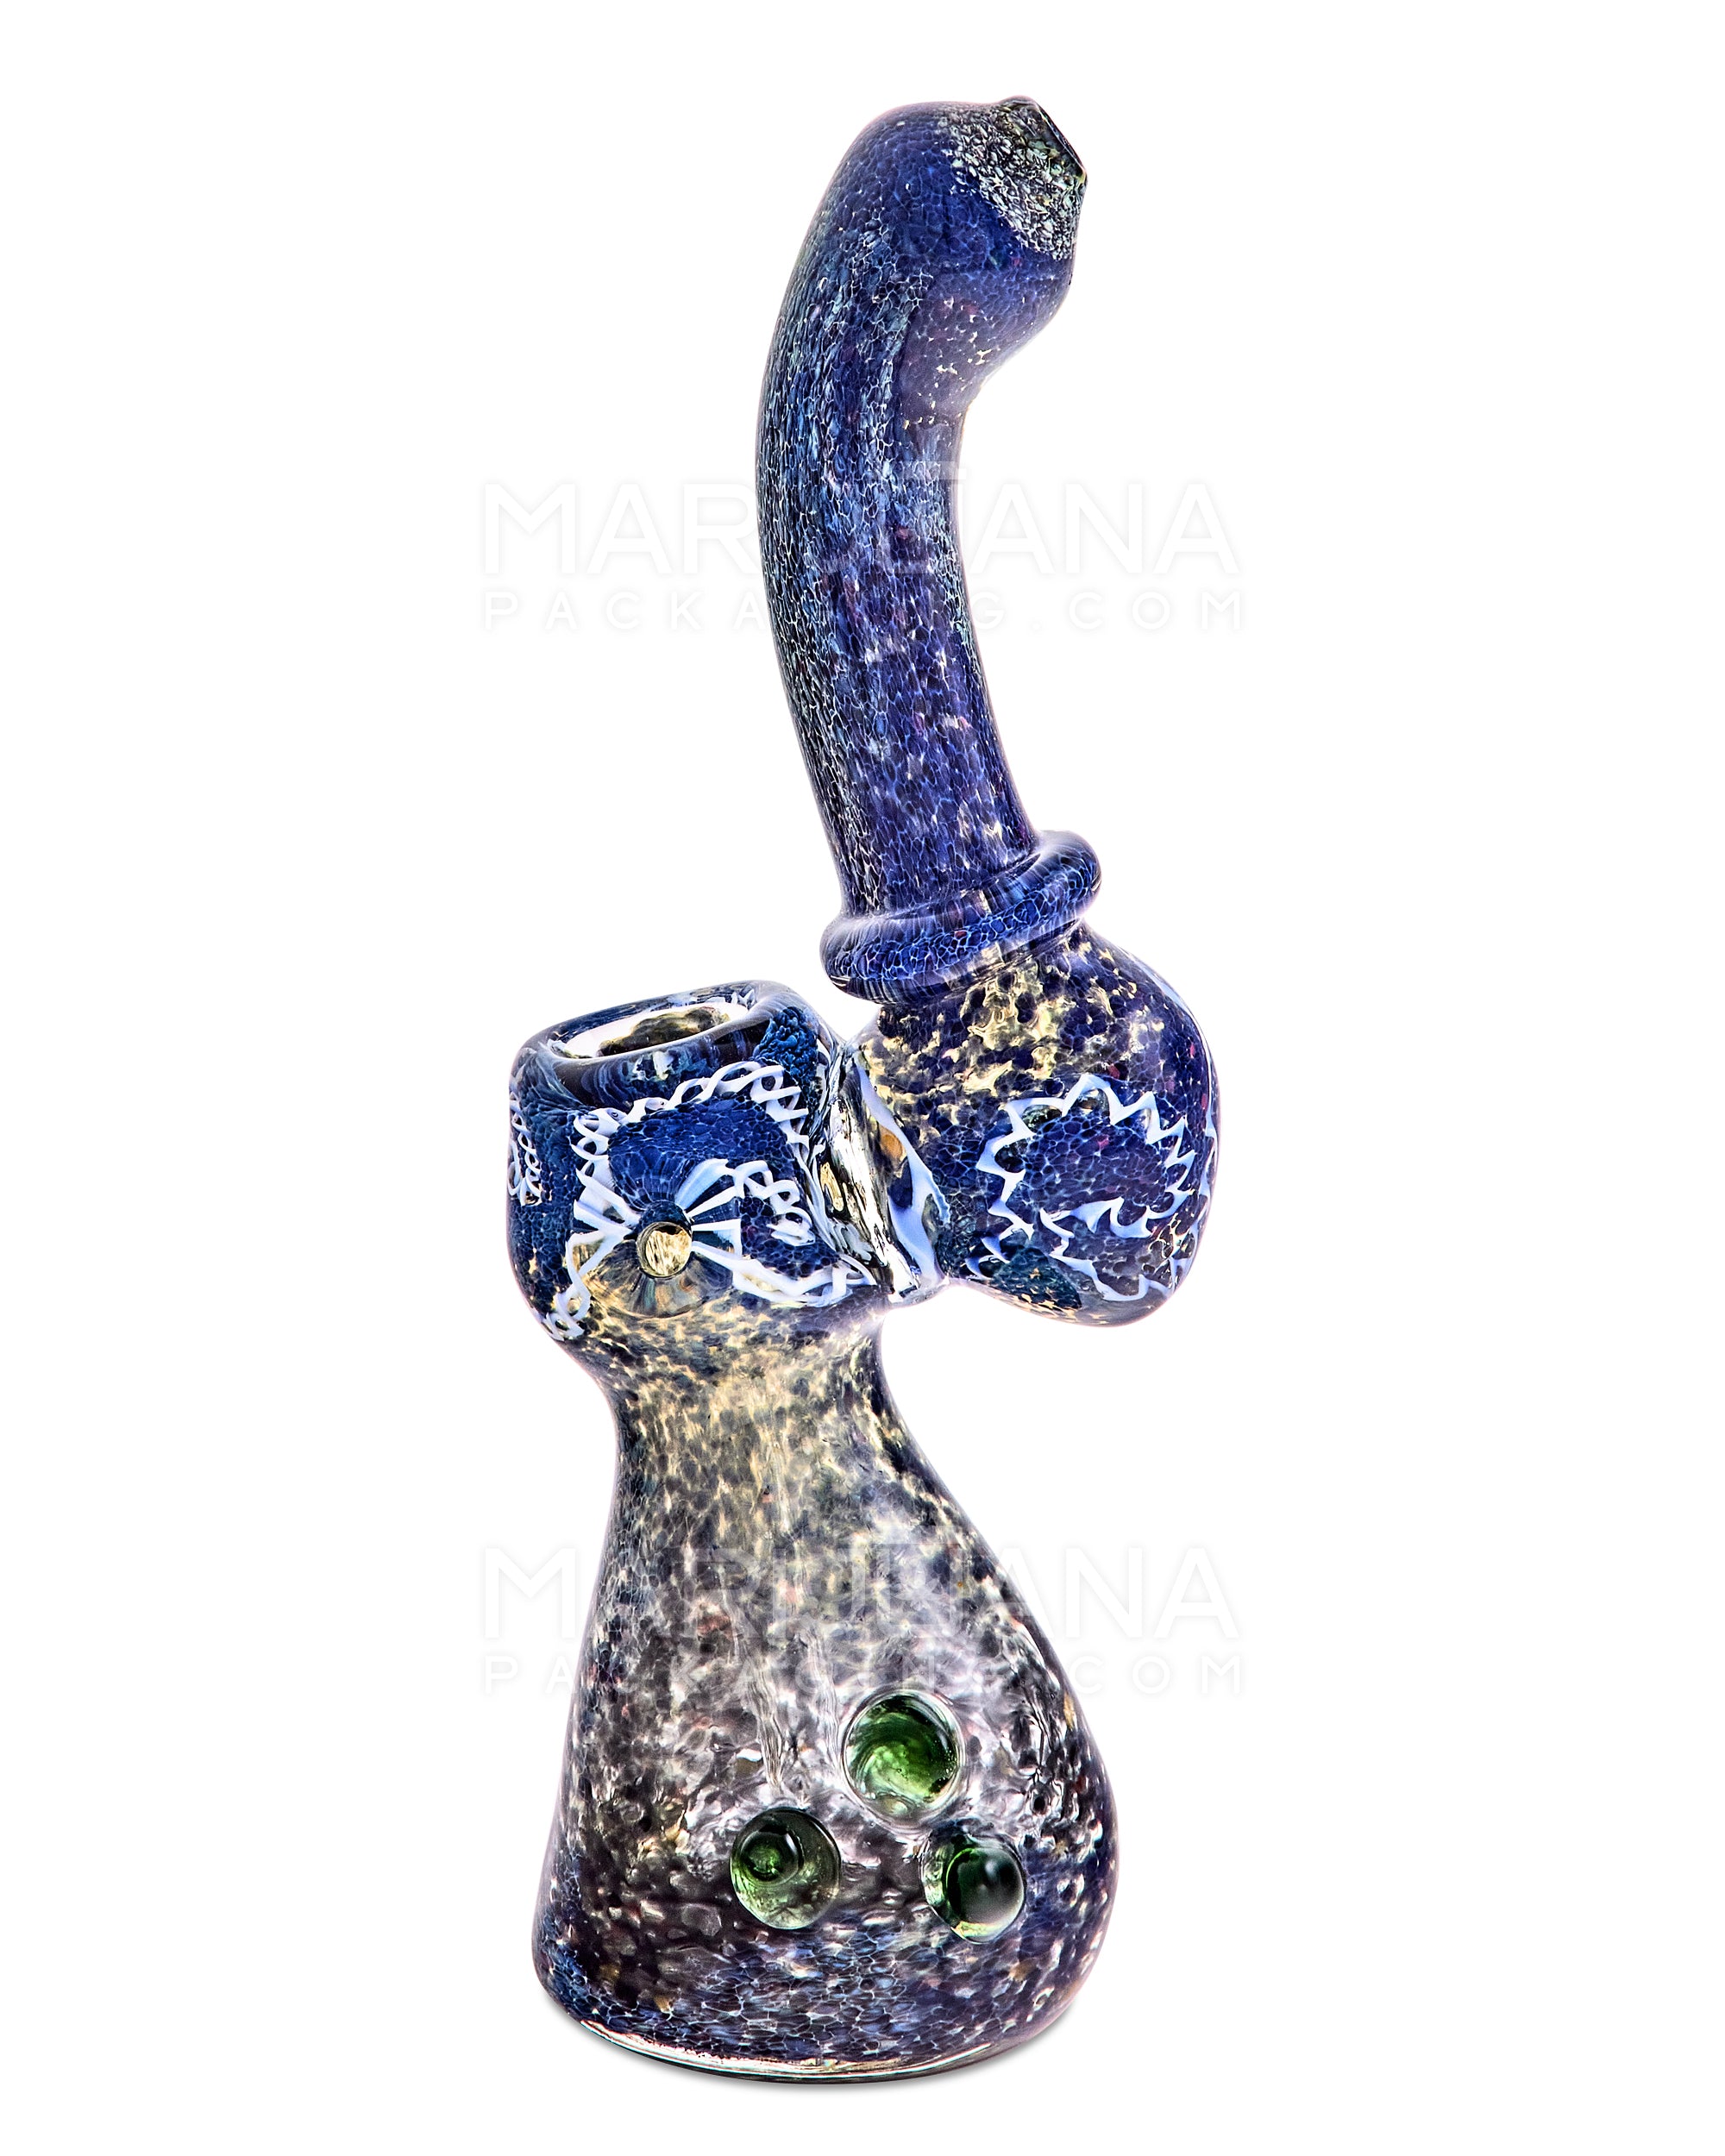 Frit & Gold Fumed Ringed Bubbler w/ Ribboning & Triple Knockers | 8in Tall - Glass - Blue - 8